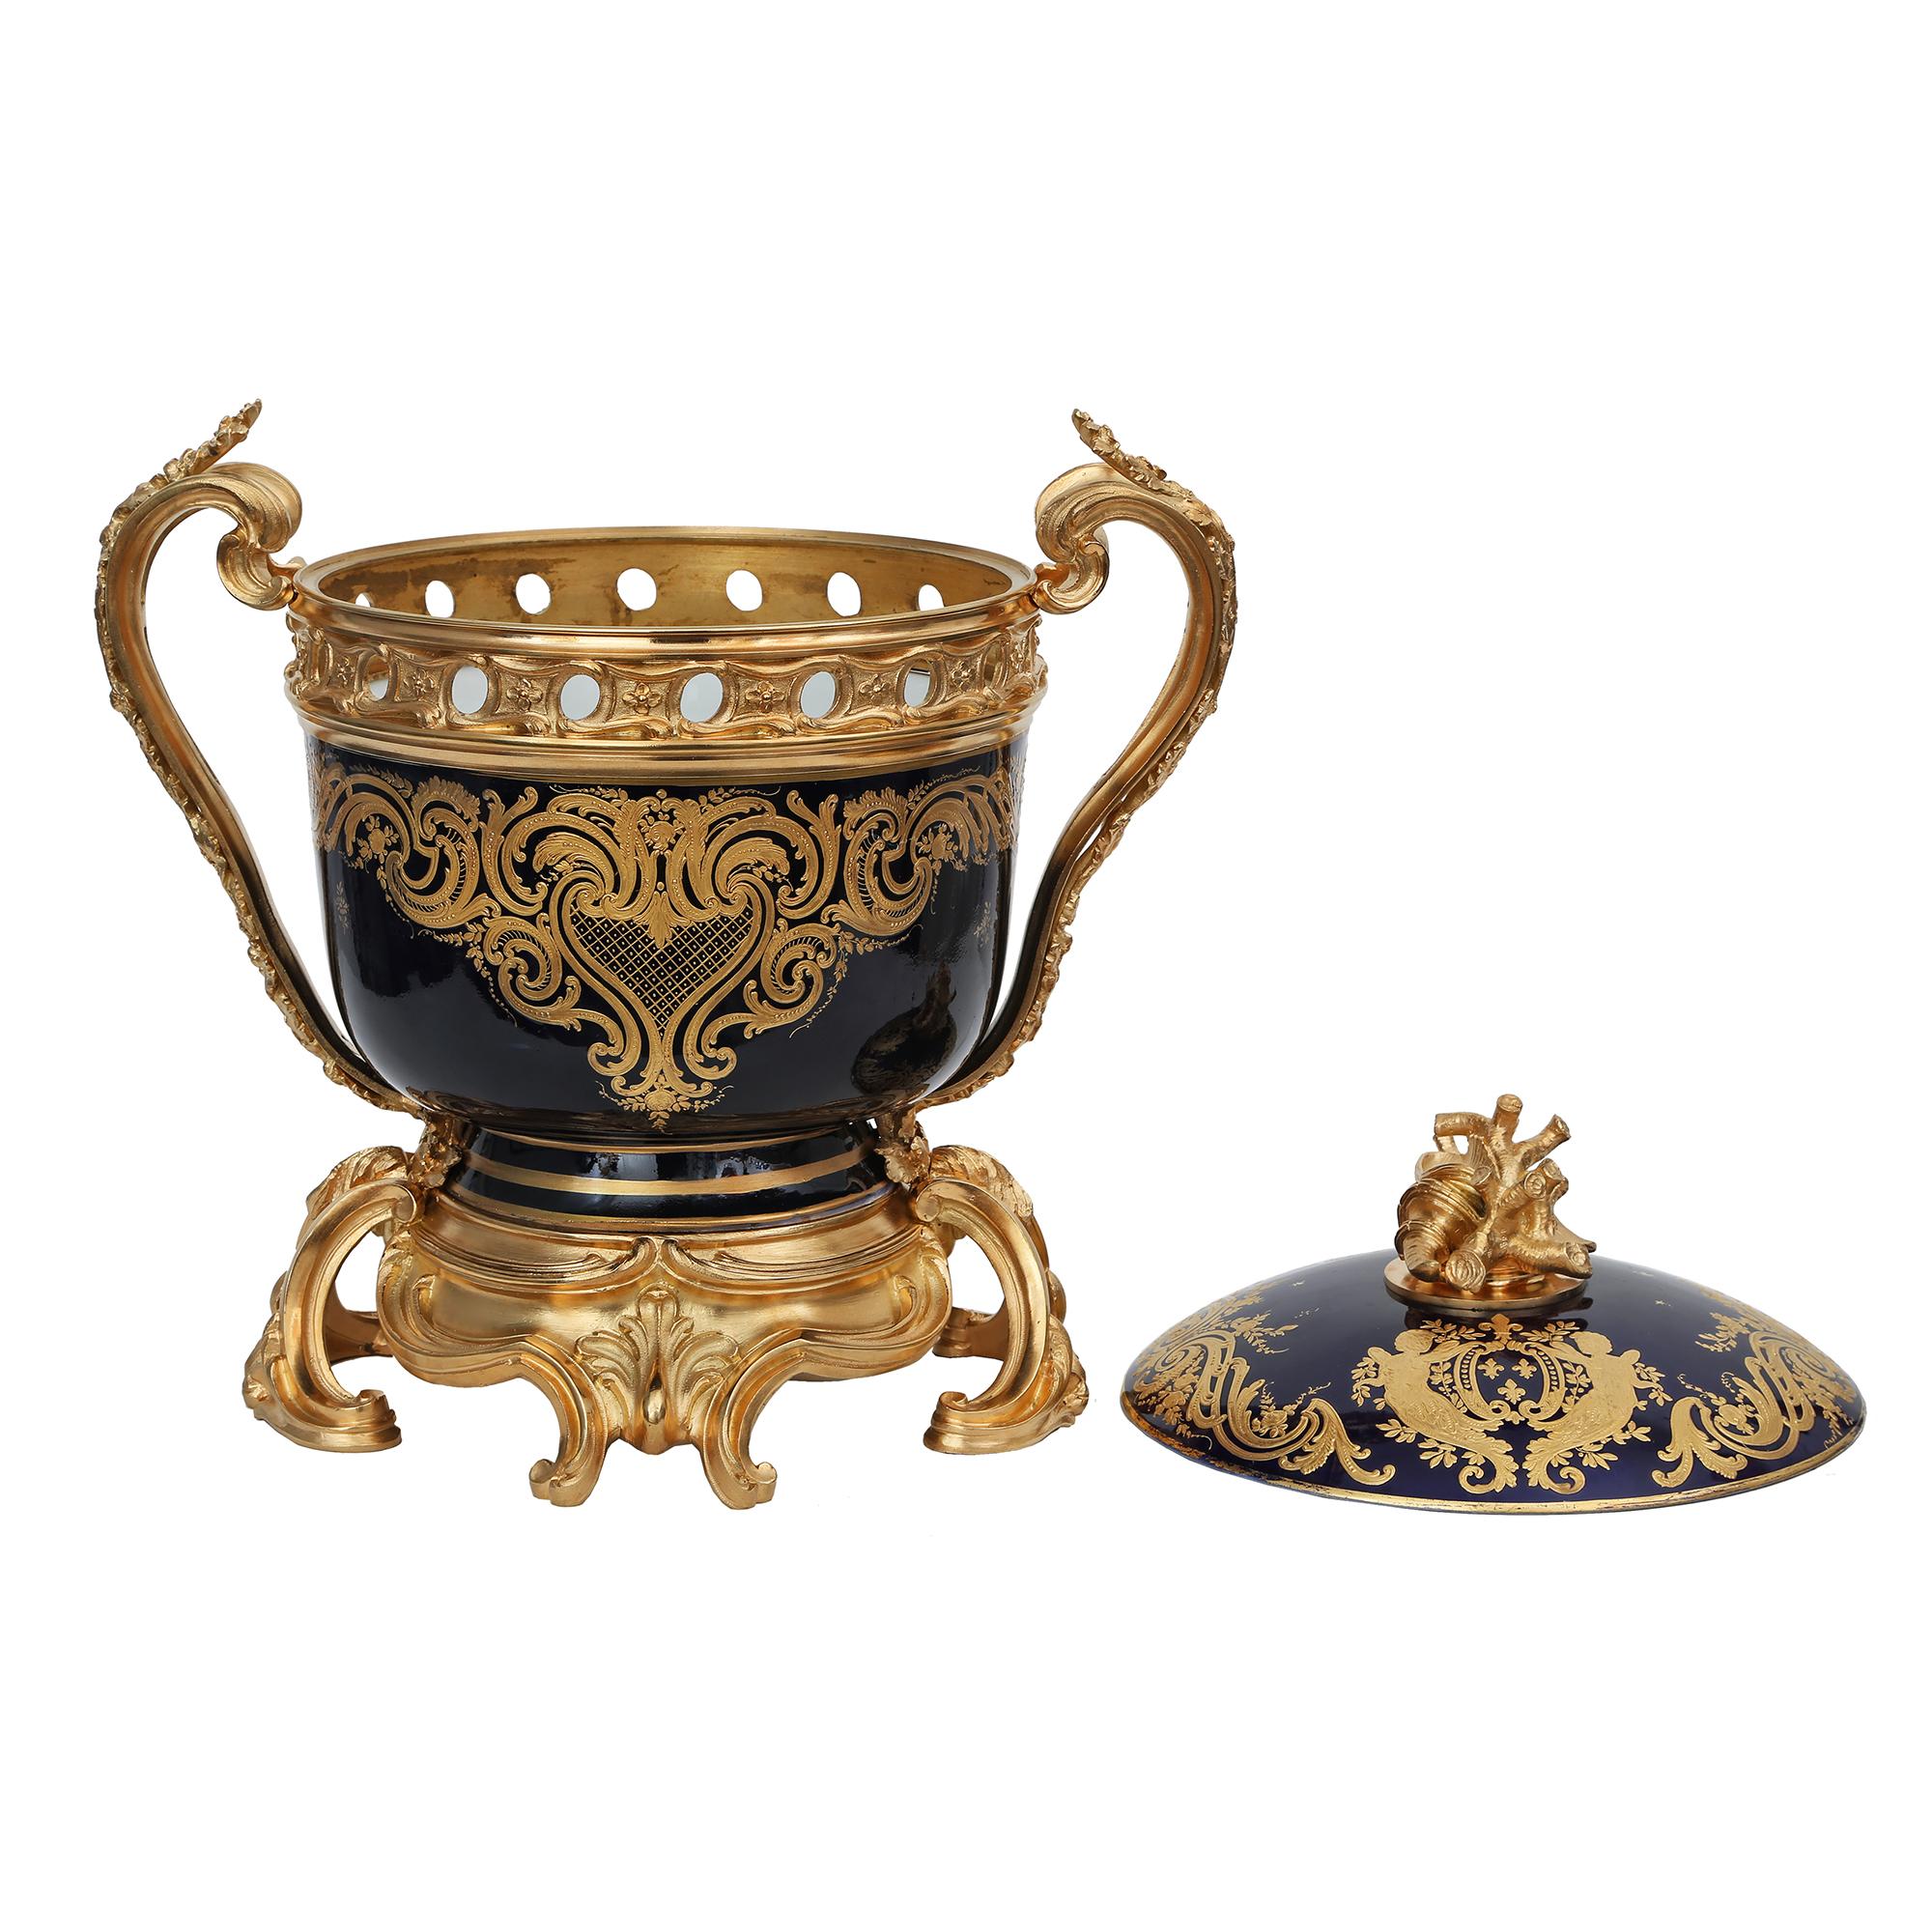 An exquisite French 19th century Louis XV st. royal cobalt blue porcelain and ormolu tureen signed Sèvres. The tureen is raised by a rich scrolled ormolu support with rich large acanthus leaves and seashell cabochons in a satin and burnished finish.